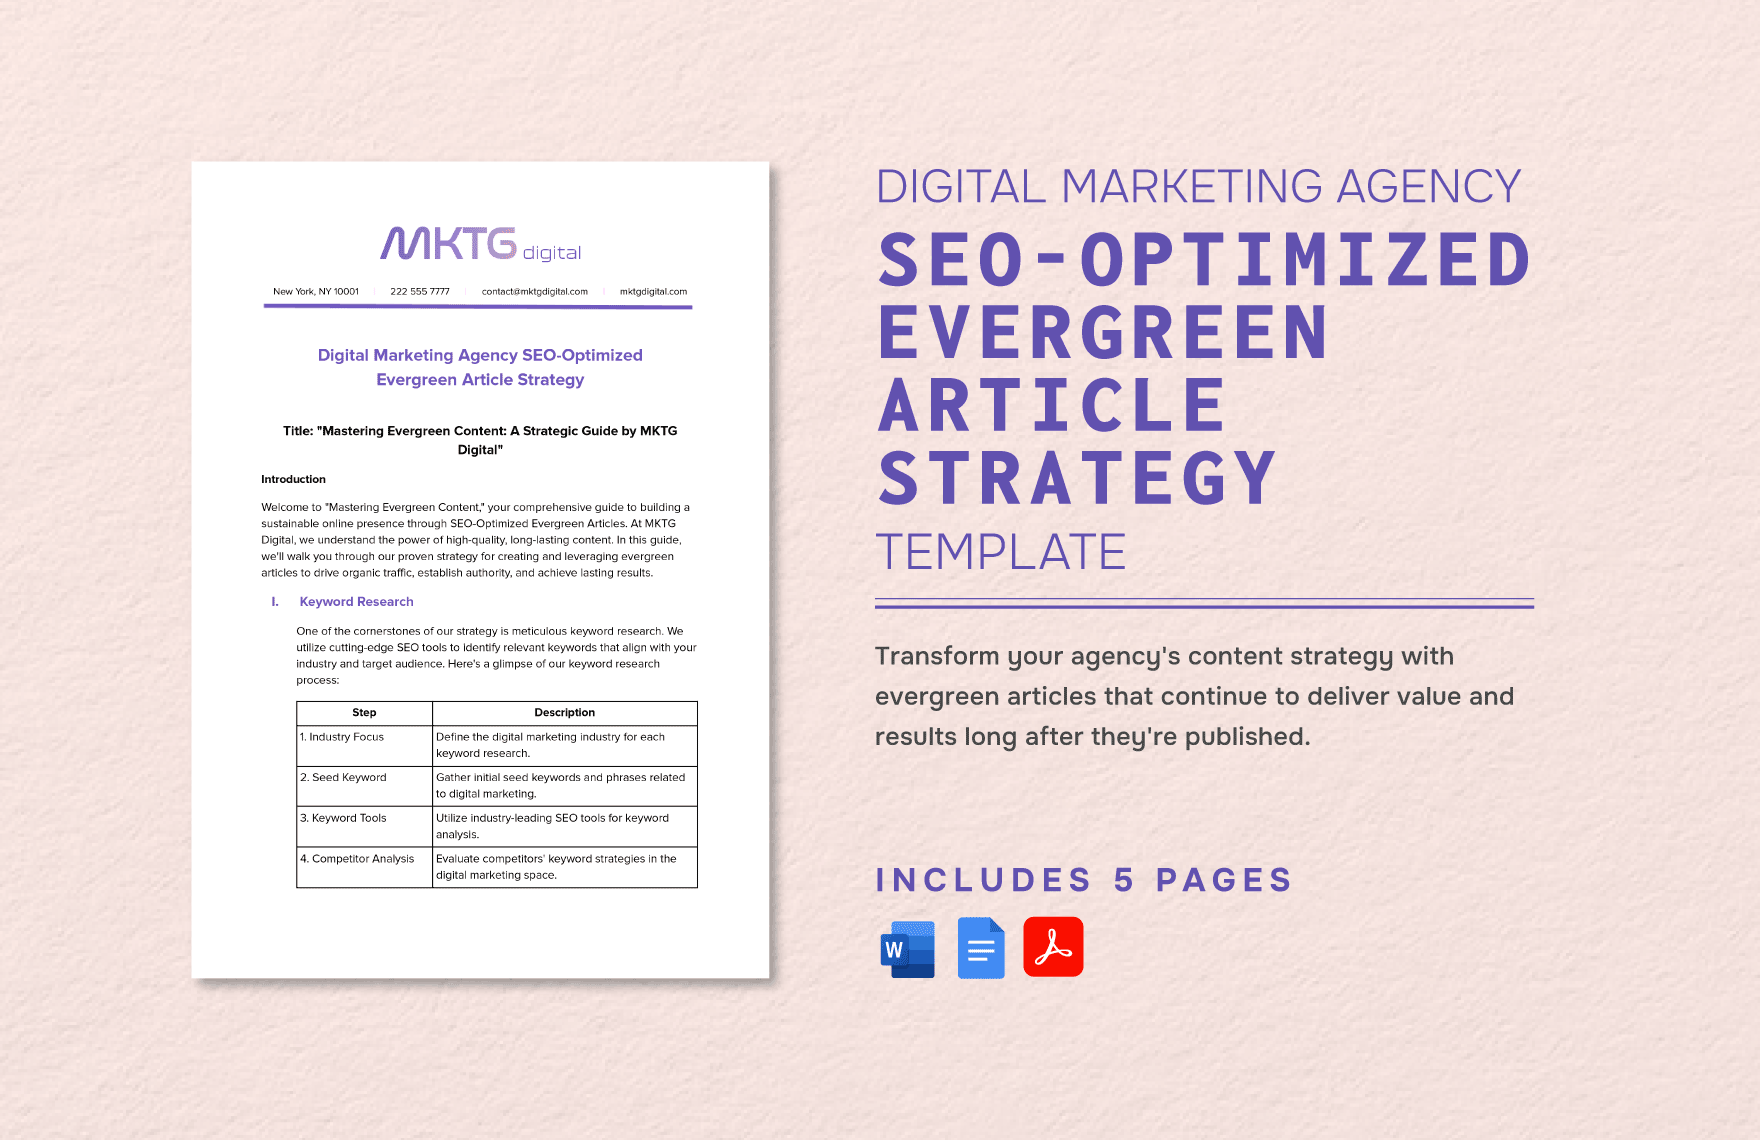 Digital Marketing Agency SEO-Optimized Evergreen Article Strategy Template